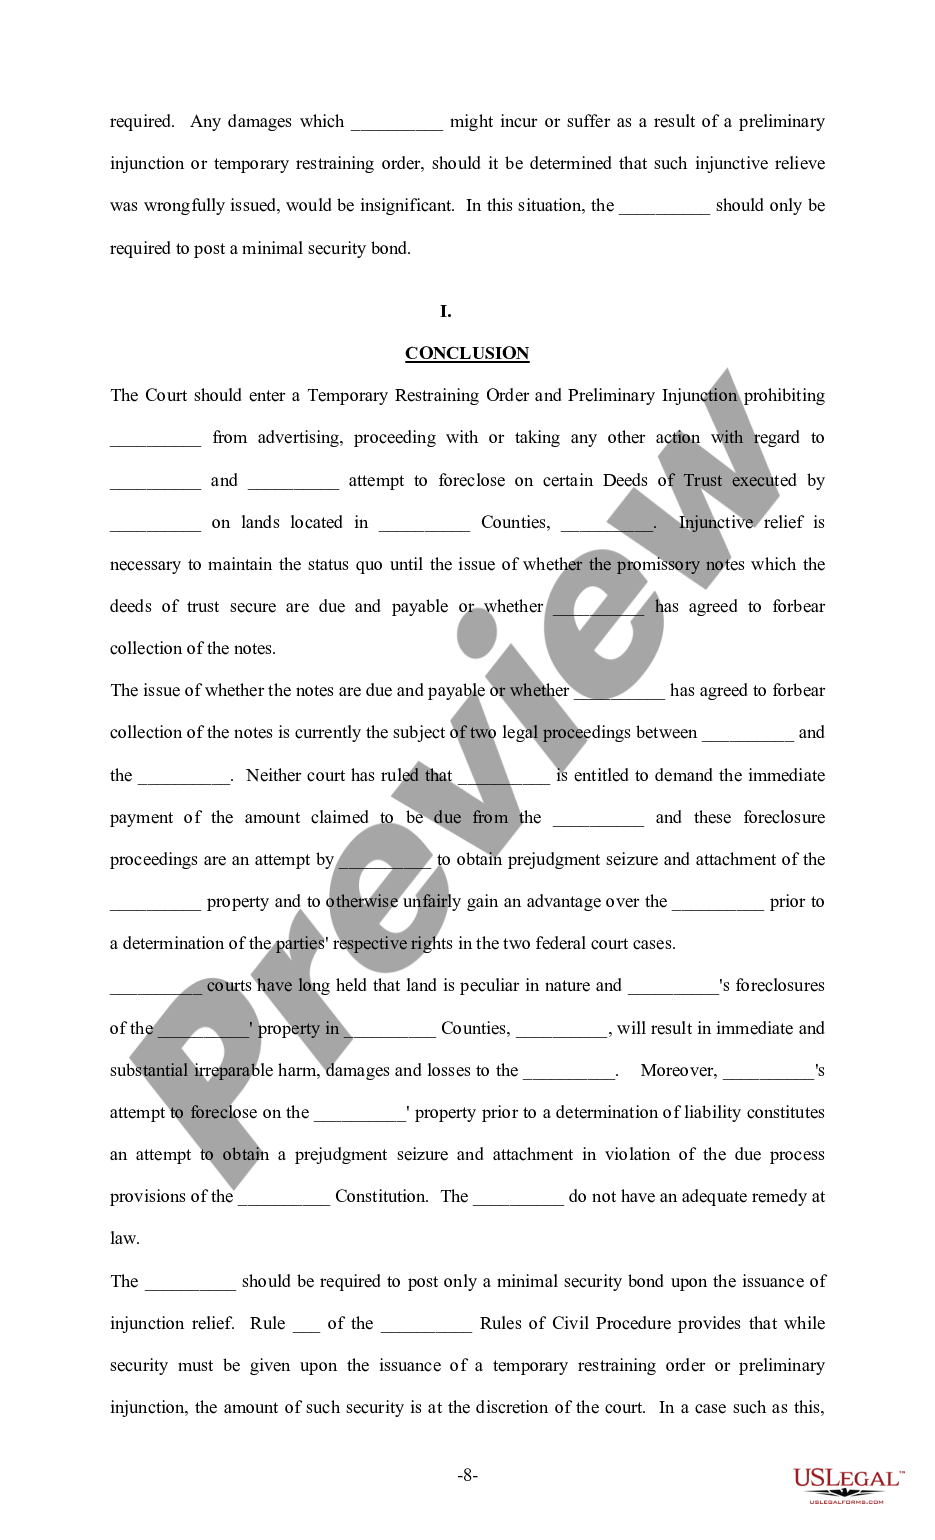 page 7 Sample Brief - Injunction preview